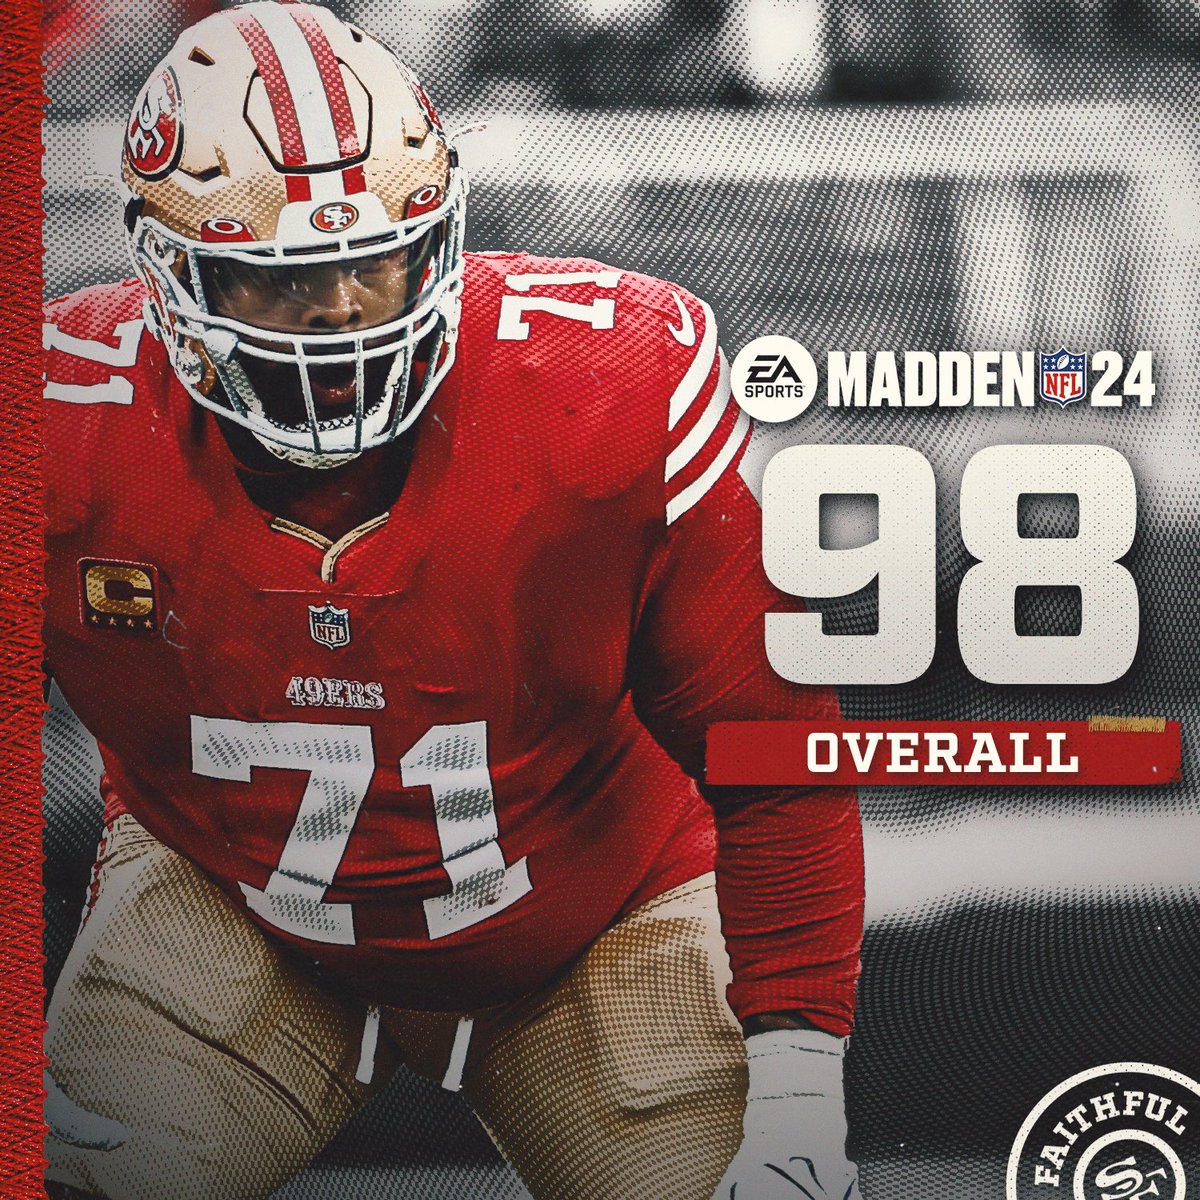 RT @49ers: Trent Williams checks in at a 98 overall in #Madden24. https://t.co/9RDc8wZdWz